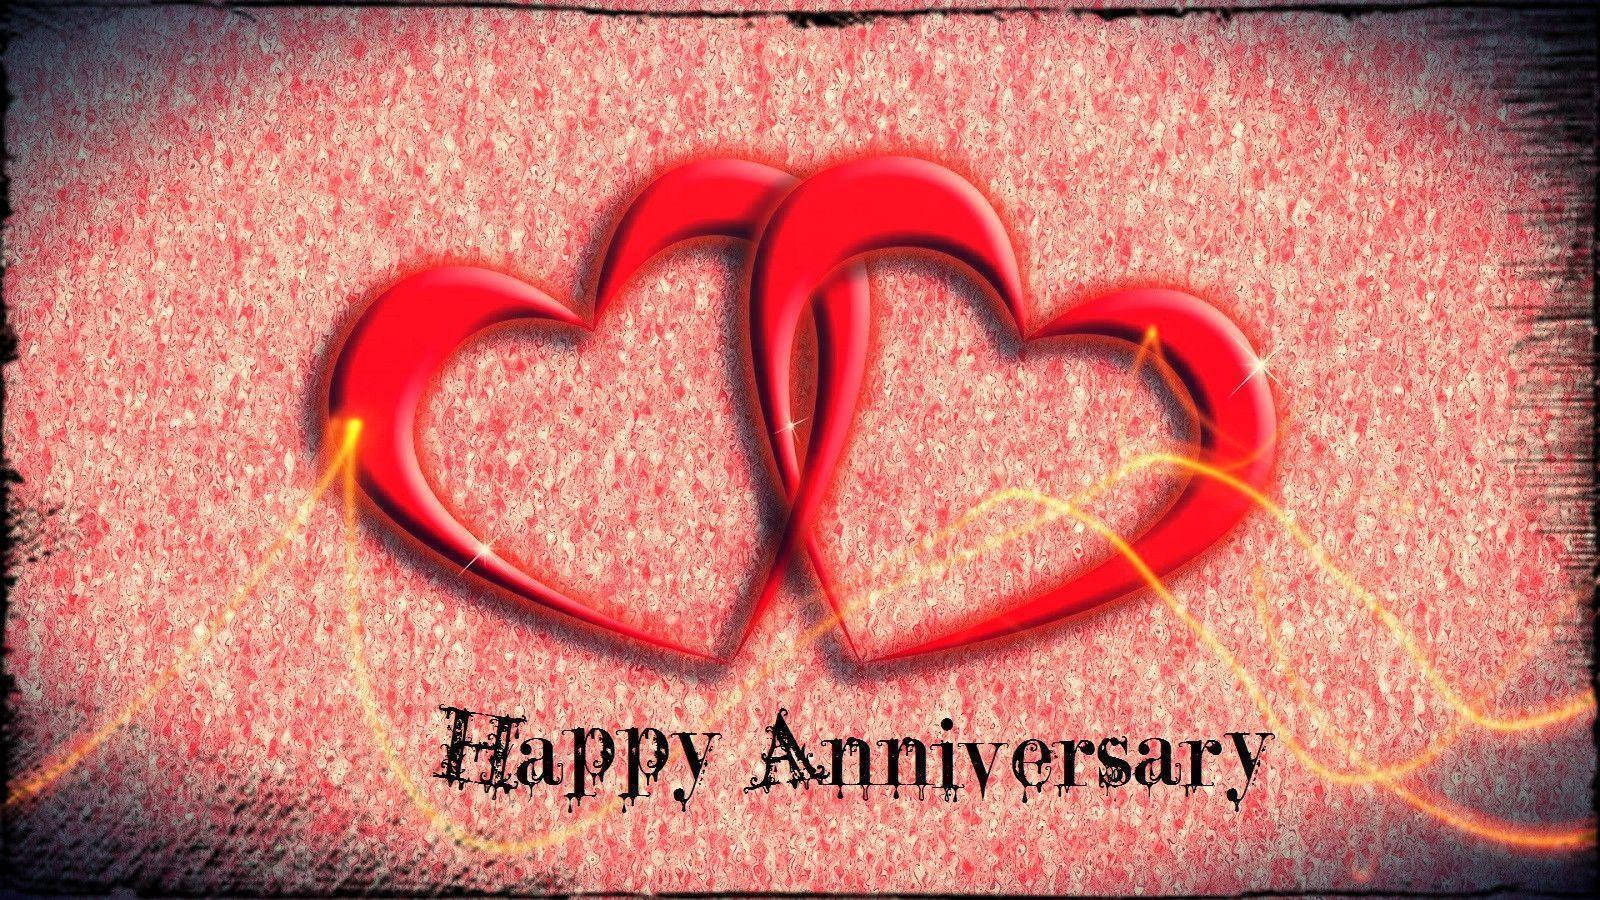 Happy Anniversary Hearts With Glowing Strings Background